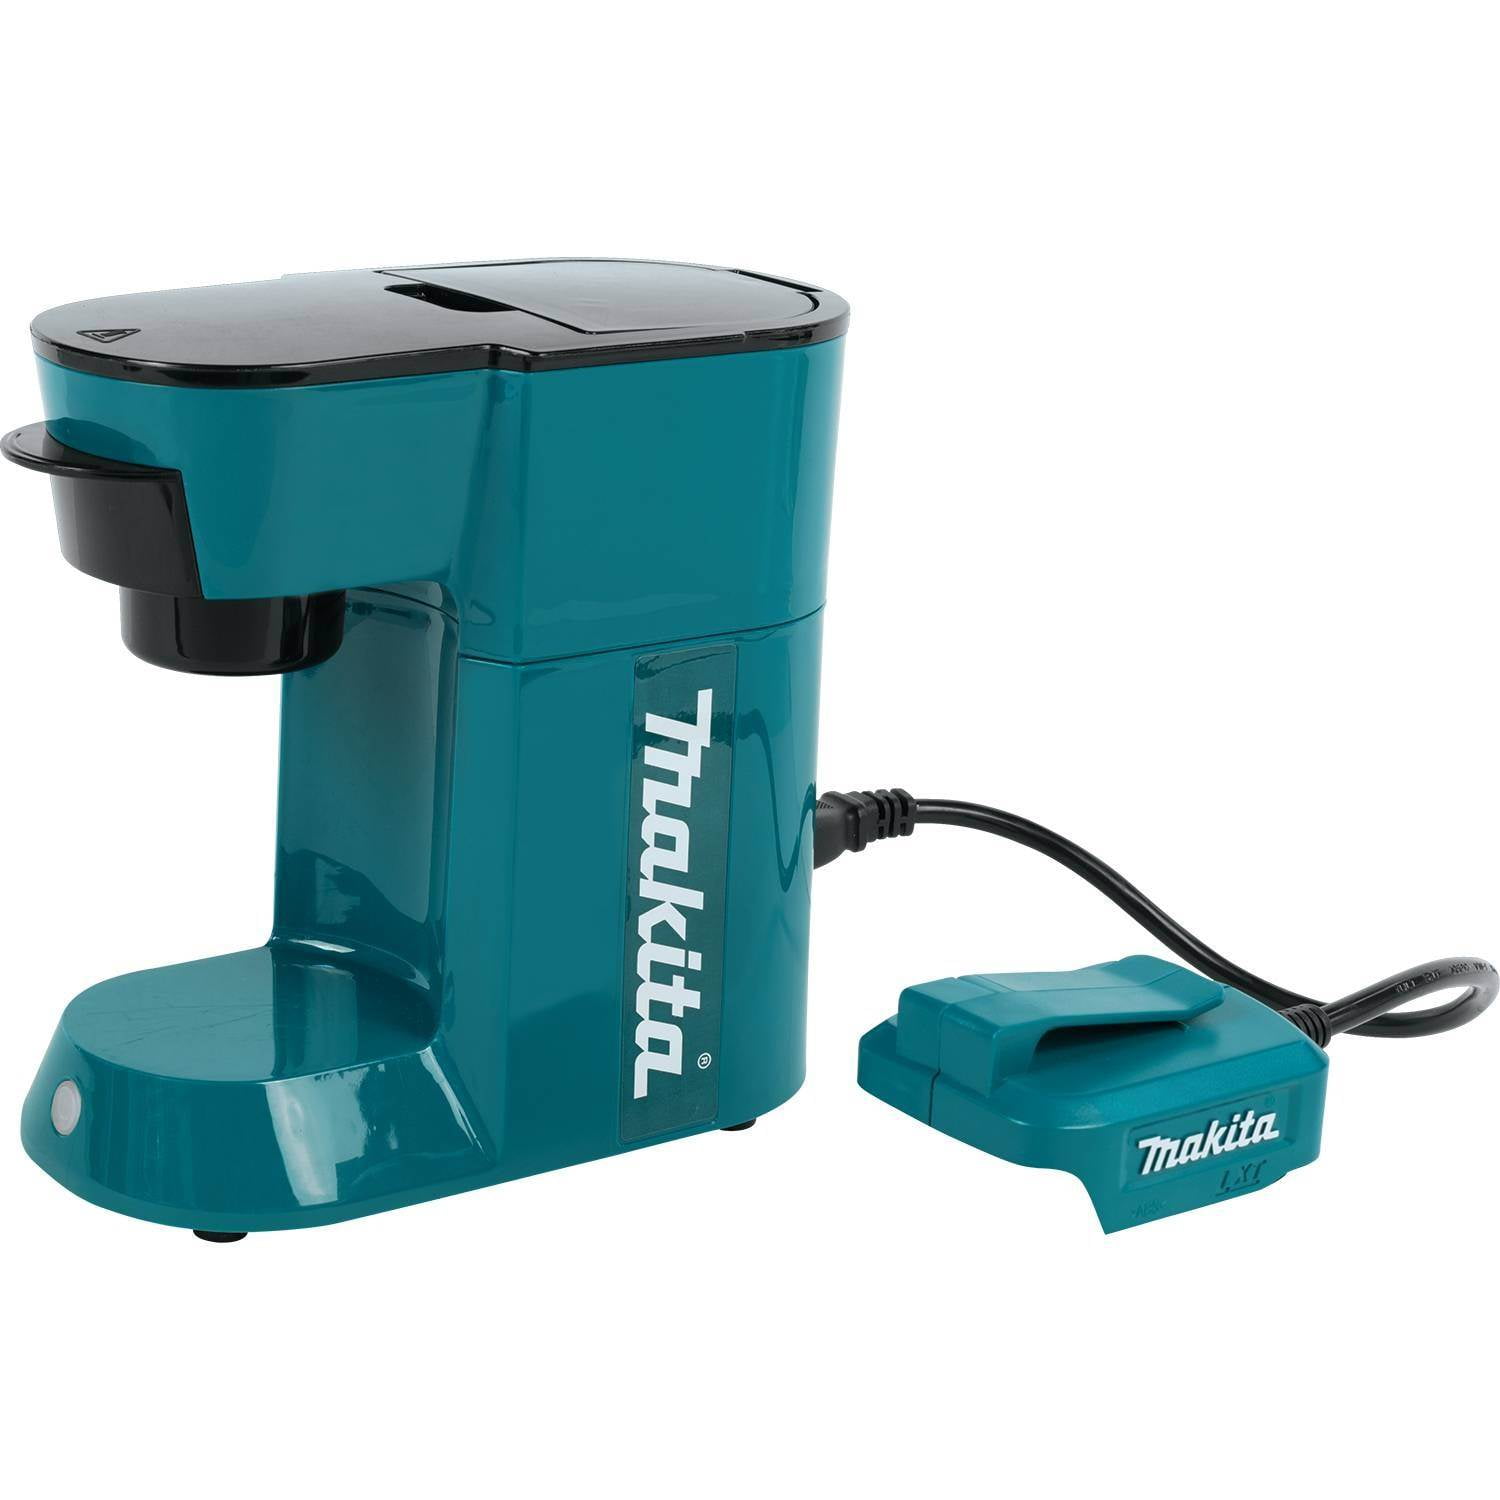 Looking for Black Friday deals I found Makita makes an 18v coffee maker.  Just thought it was fun, I'm not buying it : r/Tools